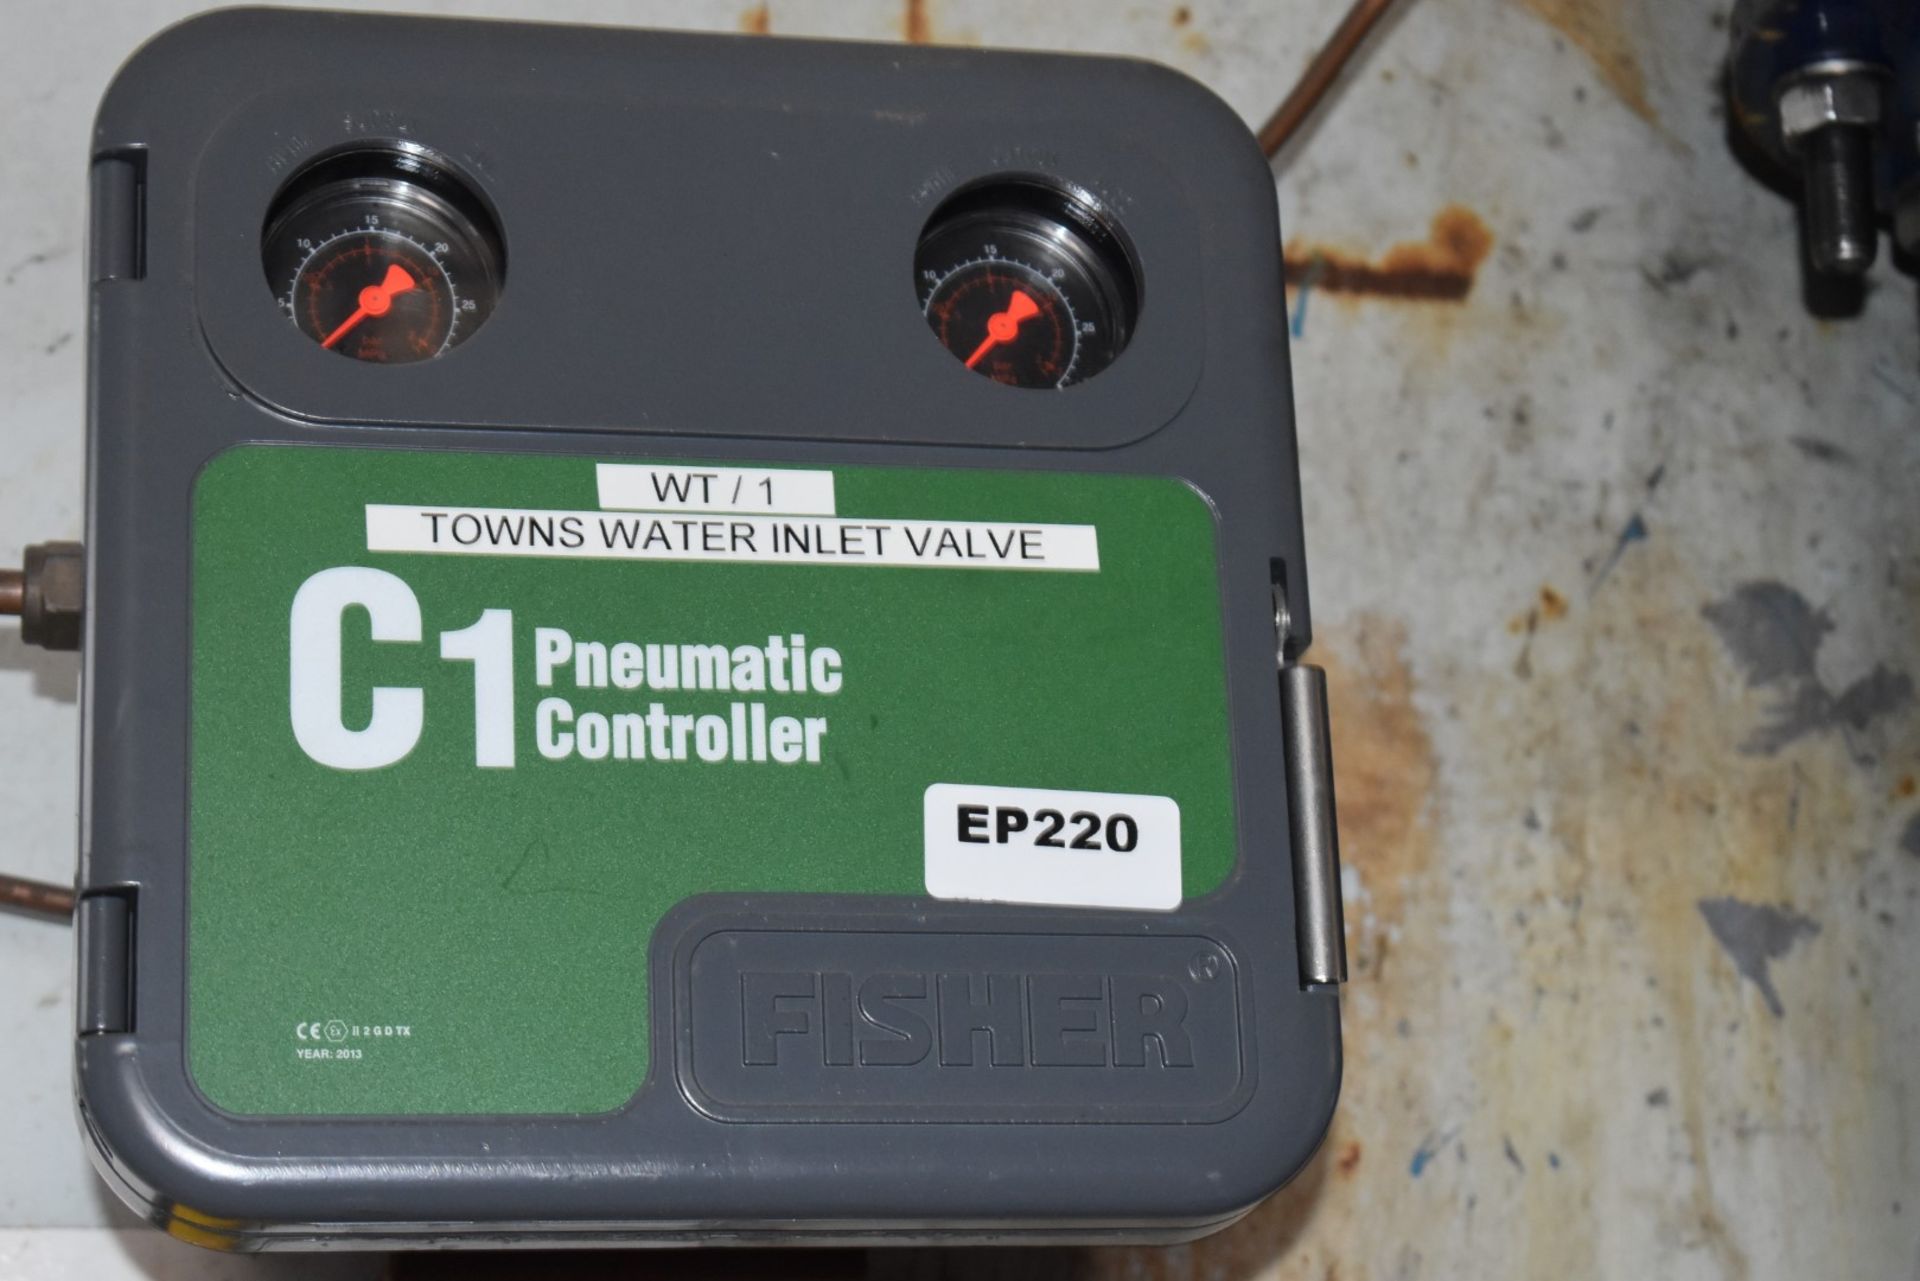 1 x El-O-Matic Pneumatic Valve Actuator With Posiflex F10 Positioner, Fisher C1 Controller, - Image 2 of 13